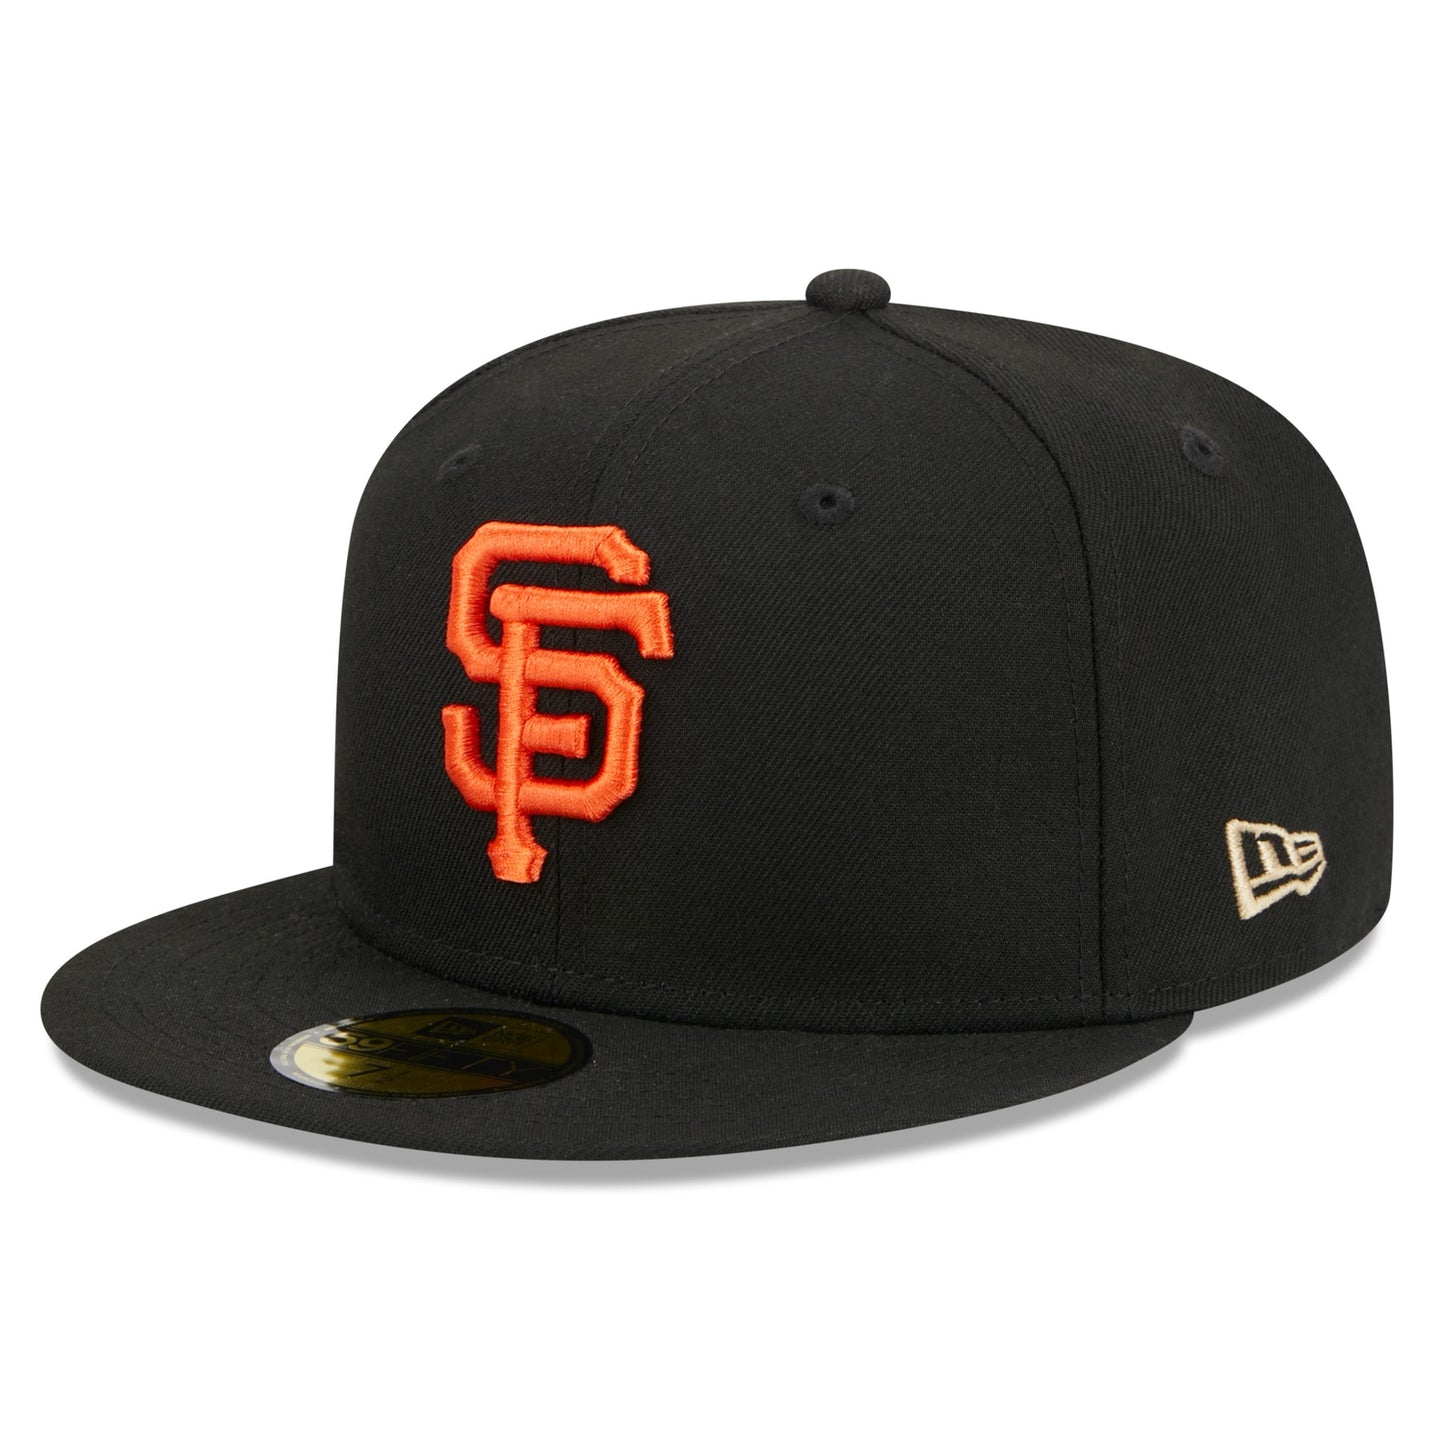 NEW ERA 59FIFTY MLB SAN FRANCISCO GIANTS ALL STAR GAME 1984 BLACK / GREEN UV FITTED CAP